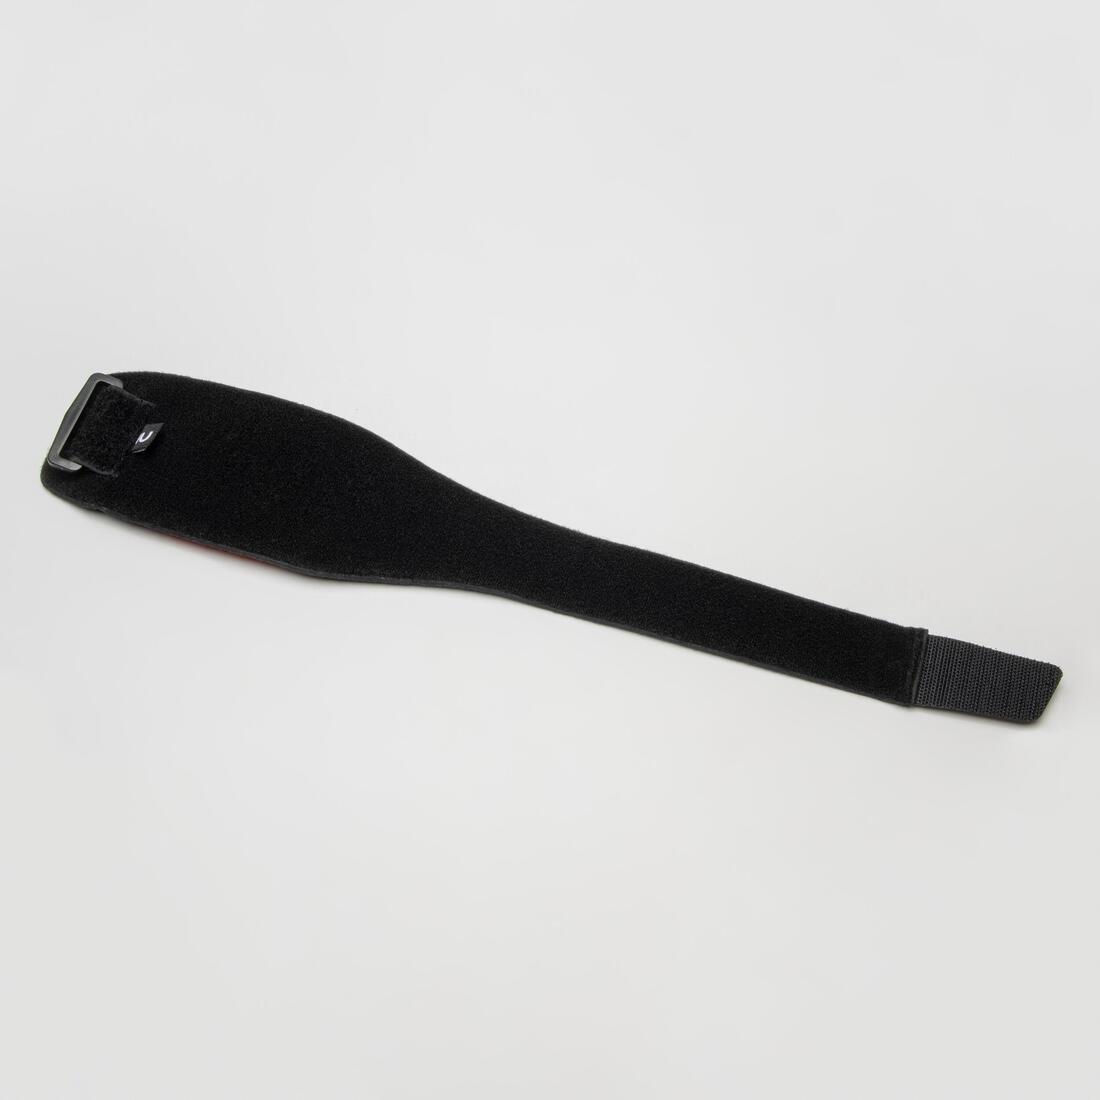 TARMAK - Adult Right/Left Supportive Elbow Strap - R500, Black